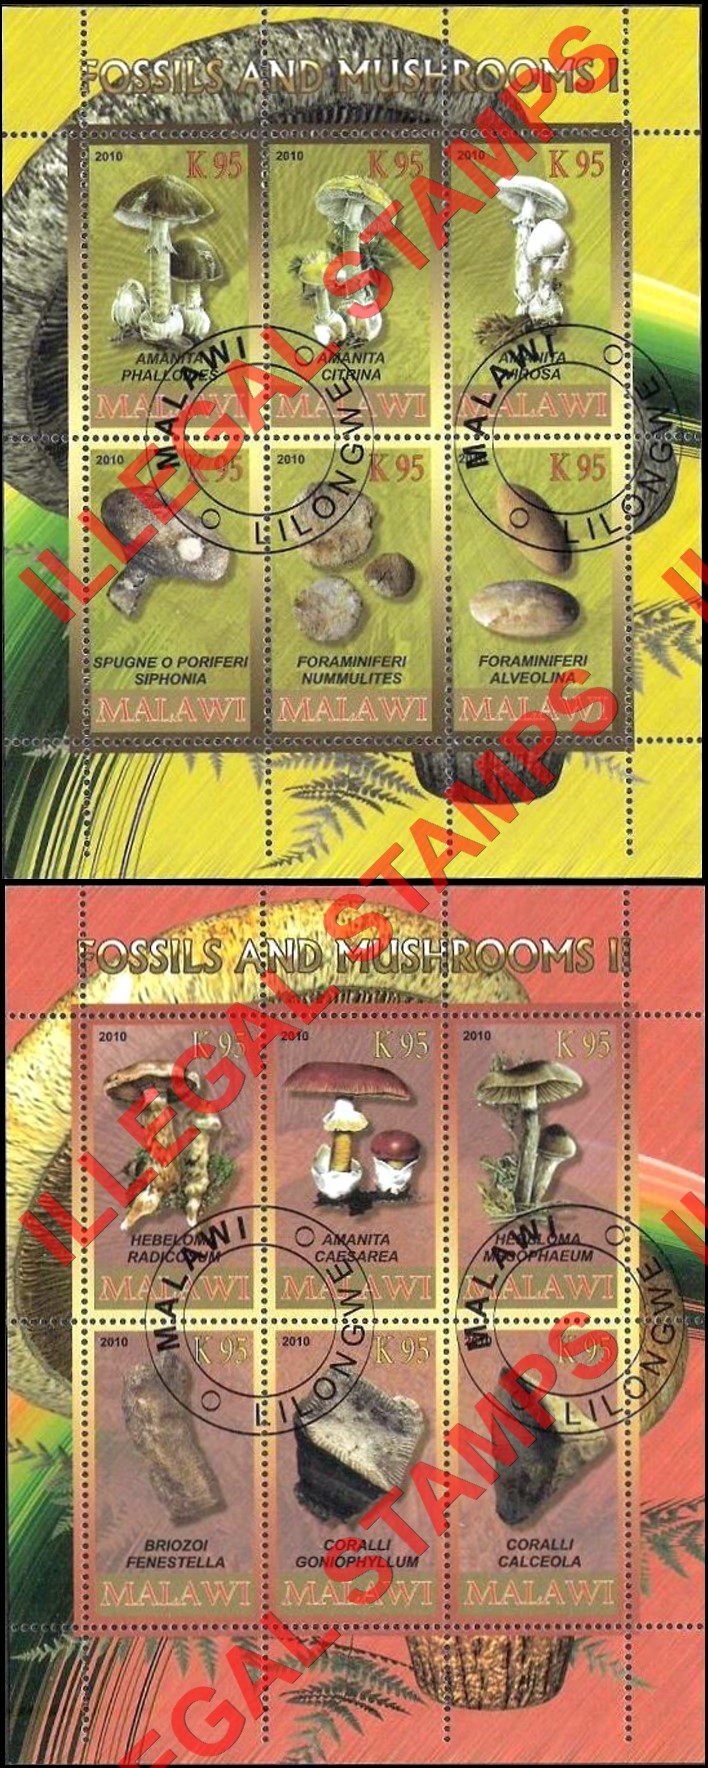 Malawi 2010 Fossils and Mushrooms Illegal Stamp Souvenir Sheets of 6 (Part 1)